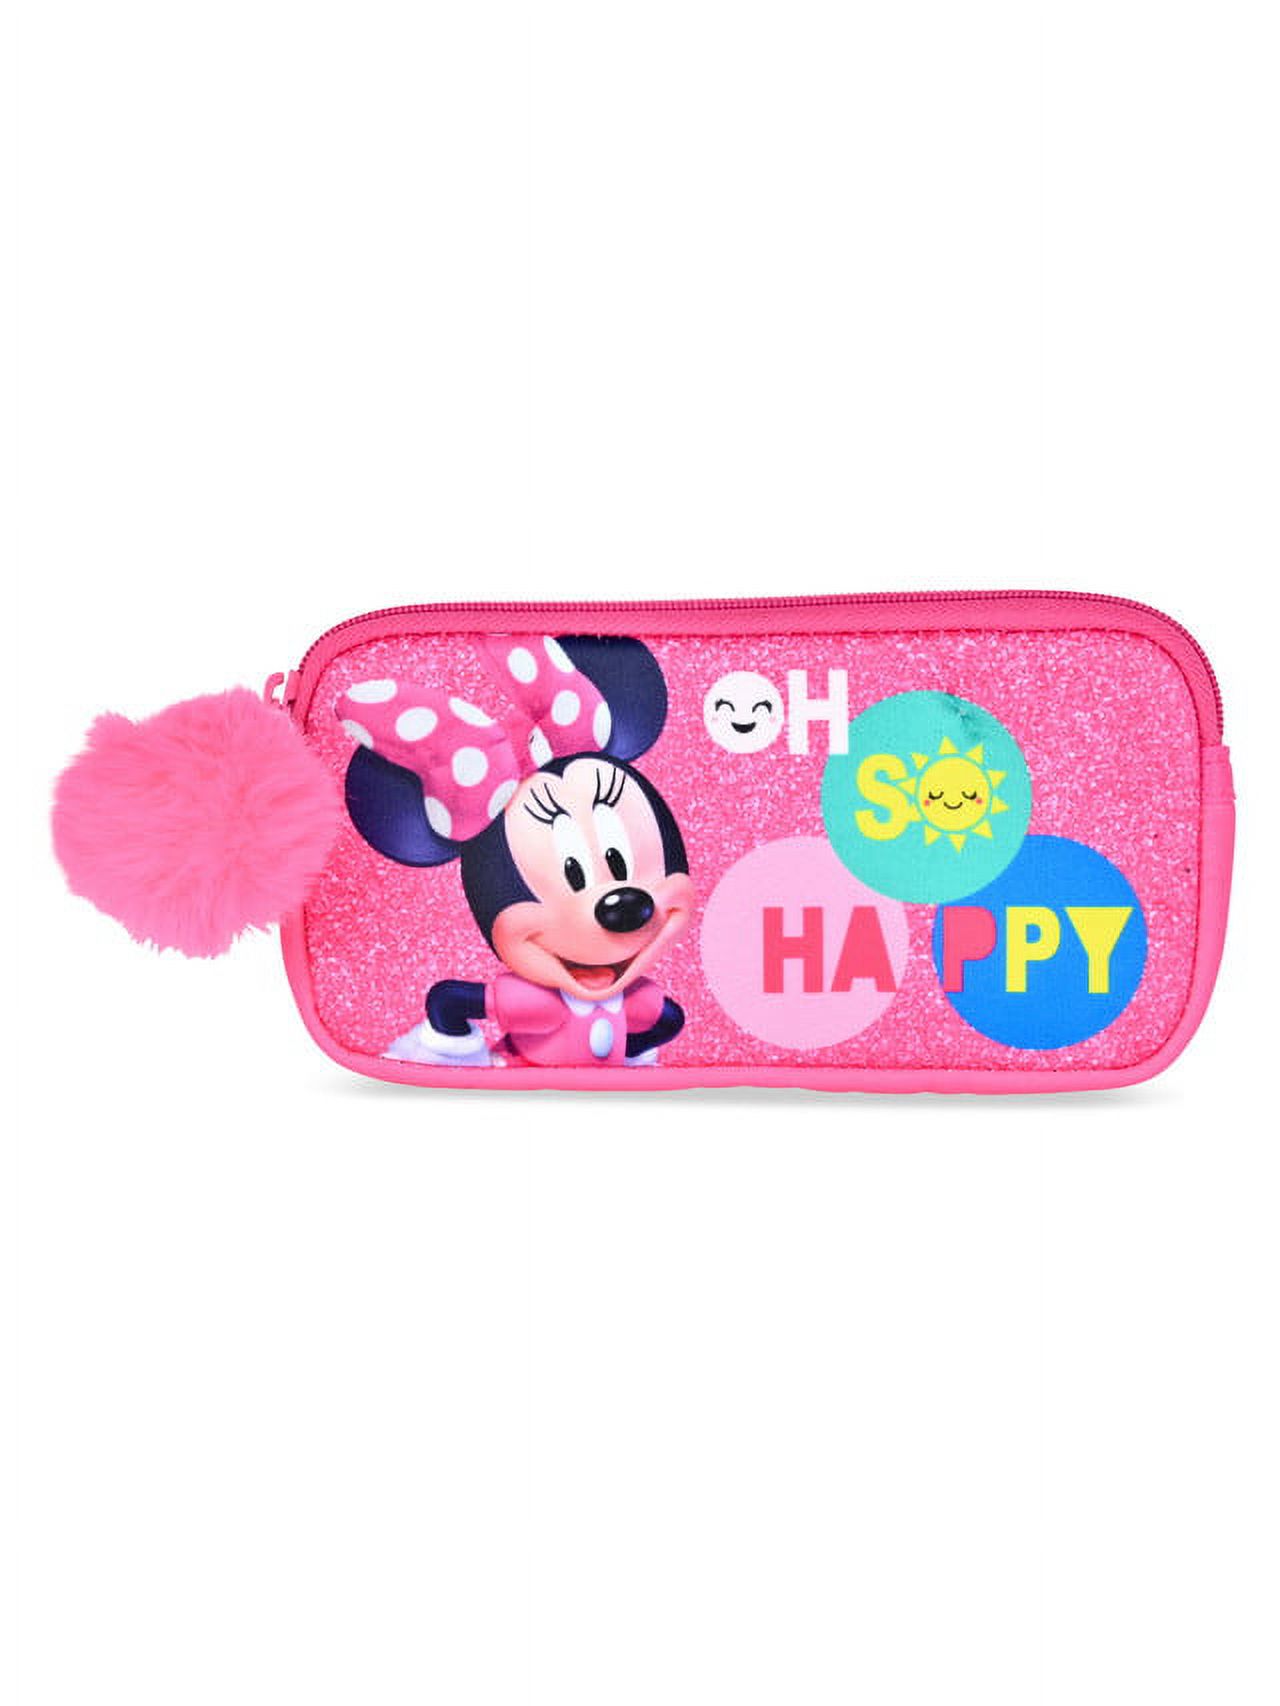 Minnie Mouse Blue Light Blocking Glasses for Boys with Zippered Case - image 3 of 5